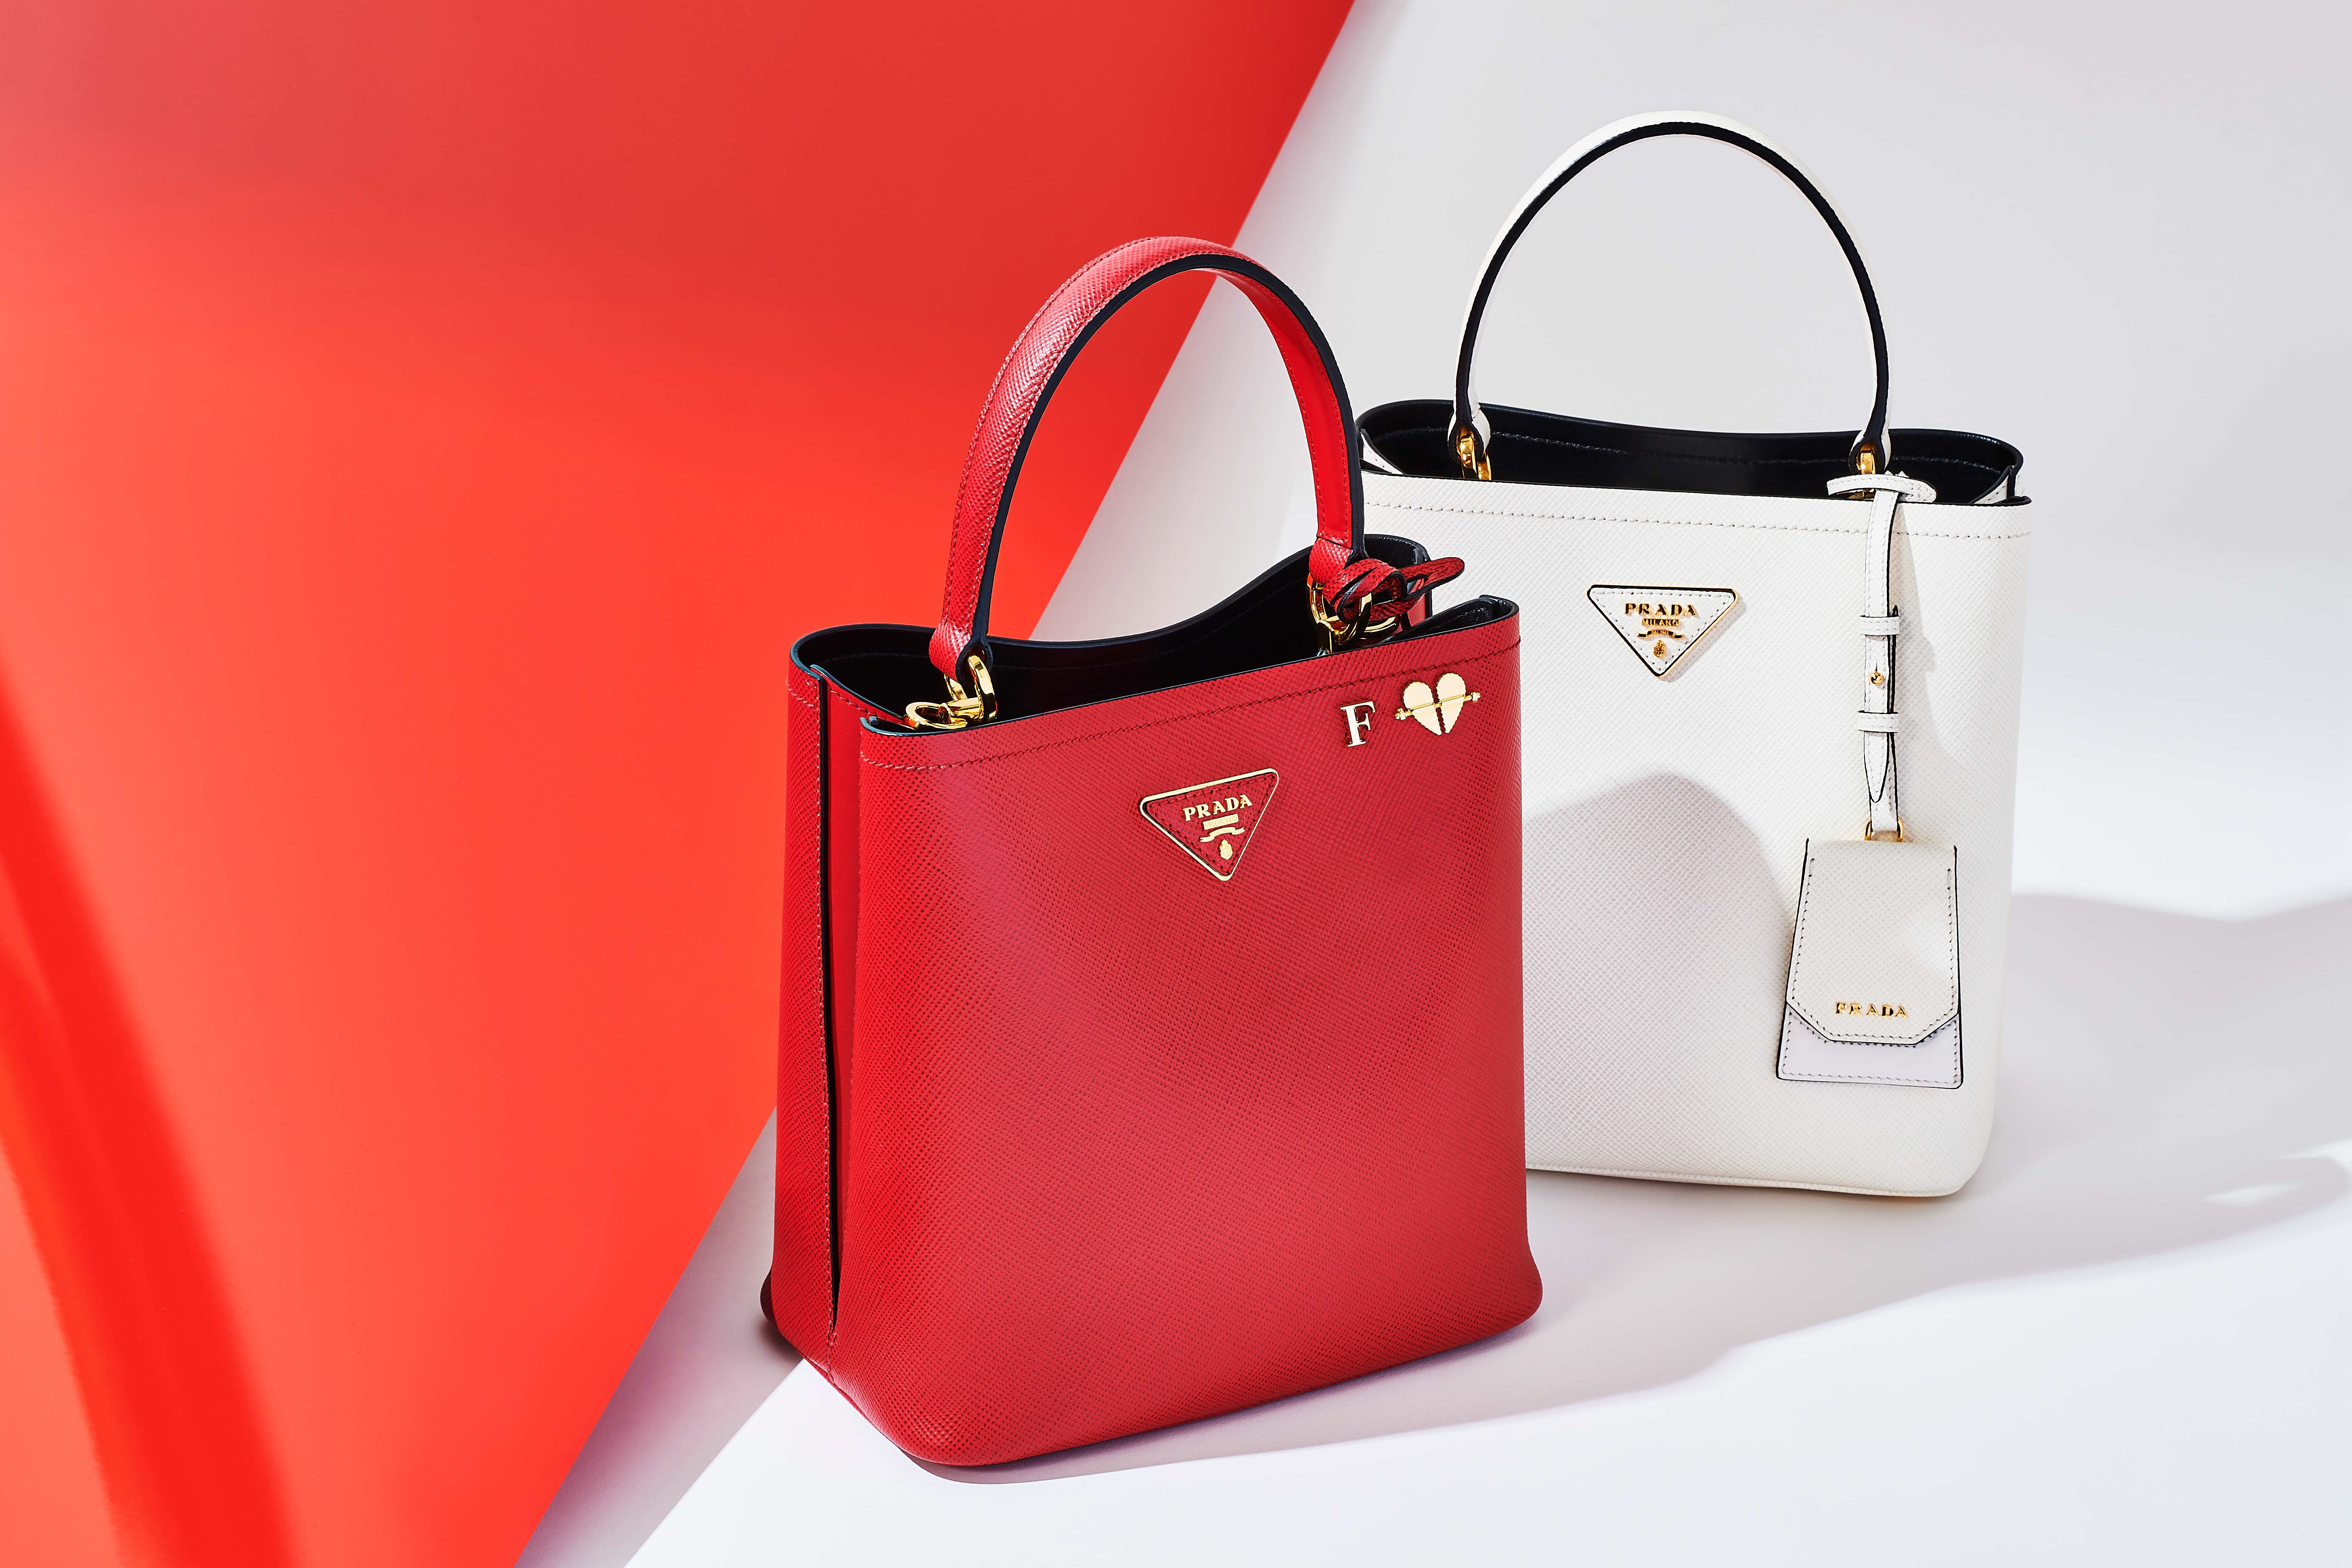 What’s noteworthy about this deal is that it's still relatively rare for luxury megabrands to team up with third-party Chinese e-commerce platforms nowadays. Photo: Courtesy of Prada